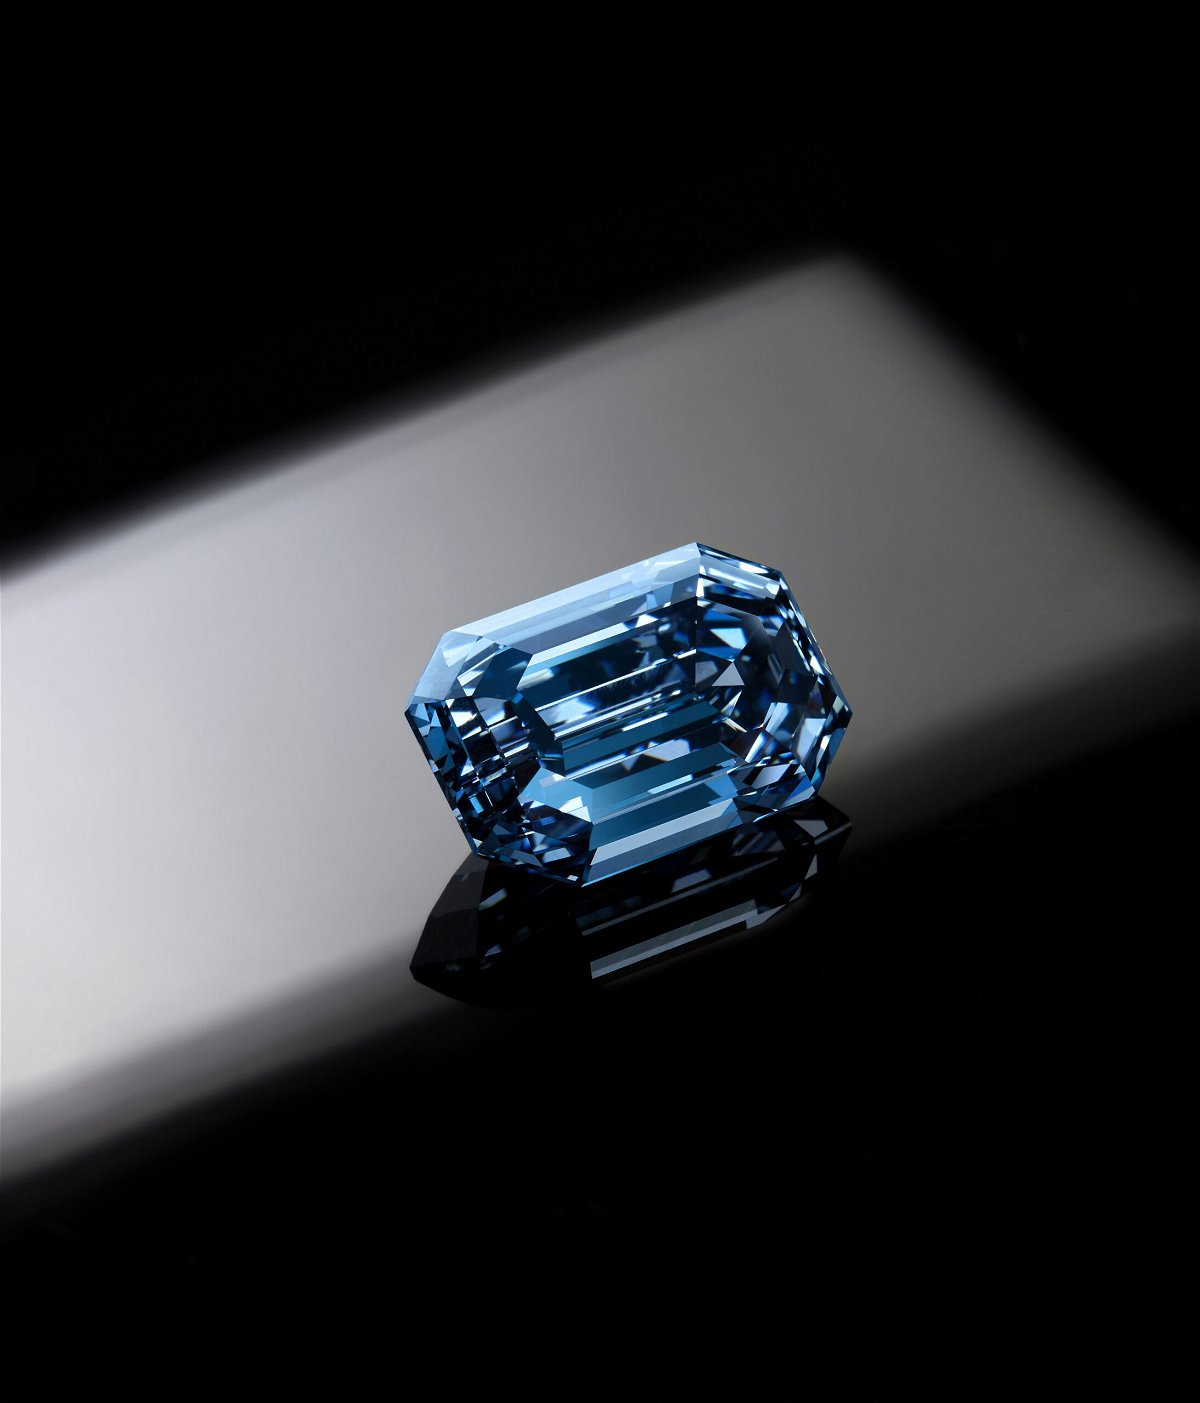 <i>Sotheby's/De Beers/Diacore</i><br/>The world's largest blue diamond ever to come to auction has sold for 450